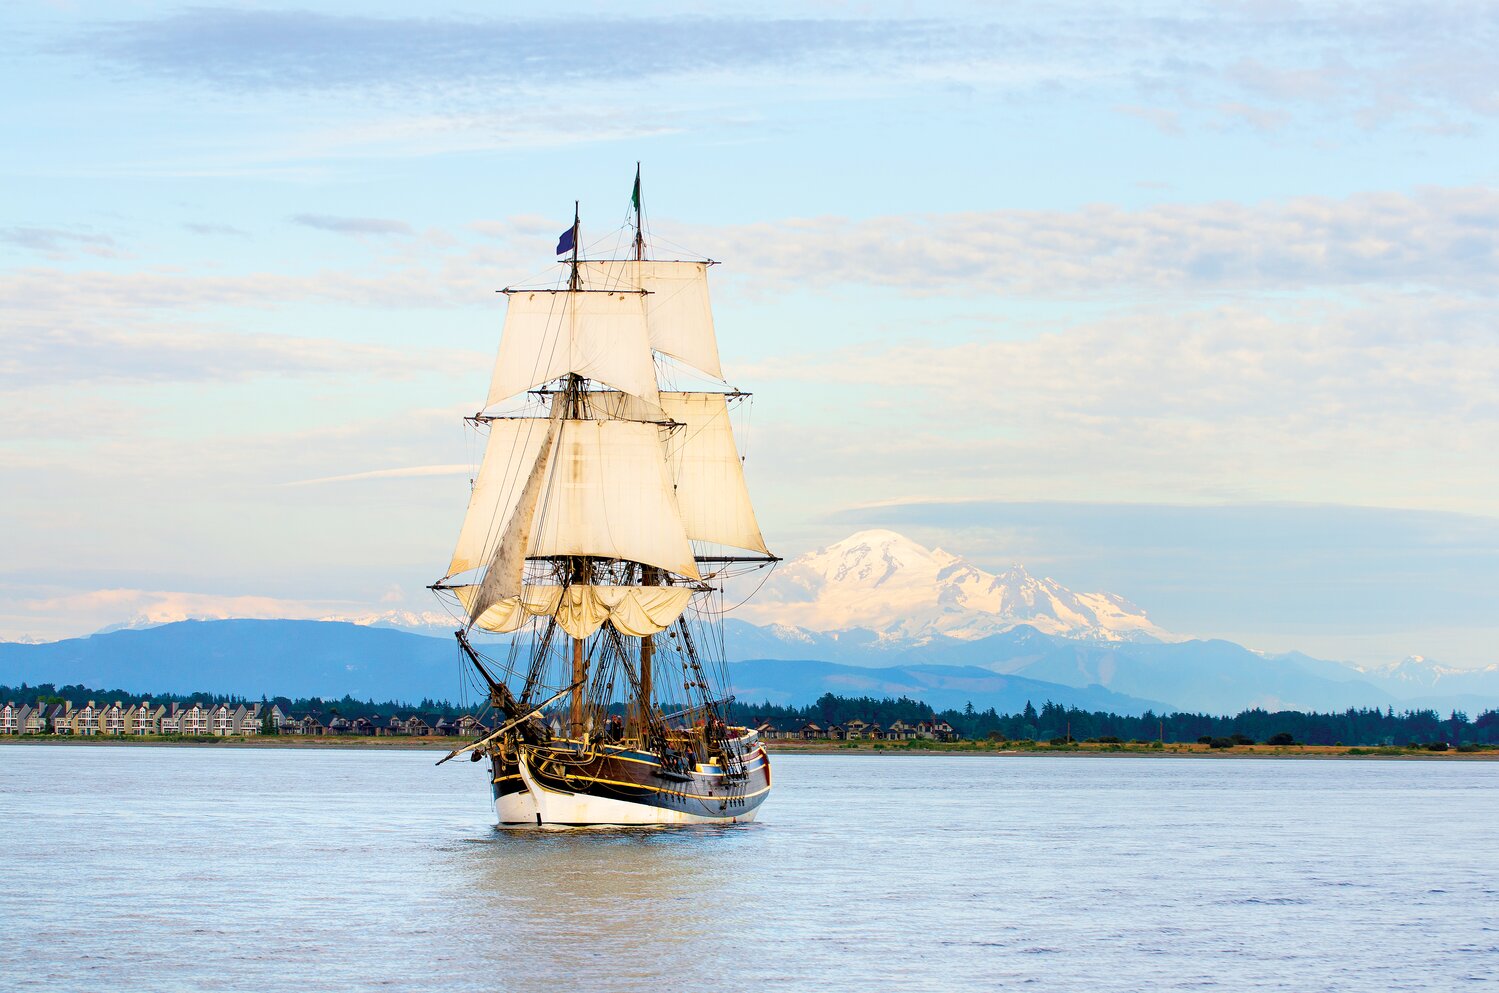 Lady Washington at sail in Semiahmoo Bay, Washington. Mount Baker is in the distance. A historic replica of the original 18th Century brig. Owned and operated by the Grays Harbor Historical Seaport, Aberdeen, Washington